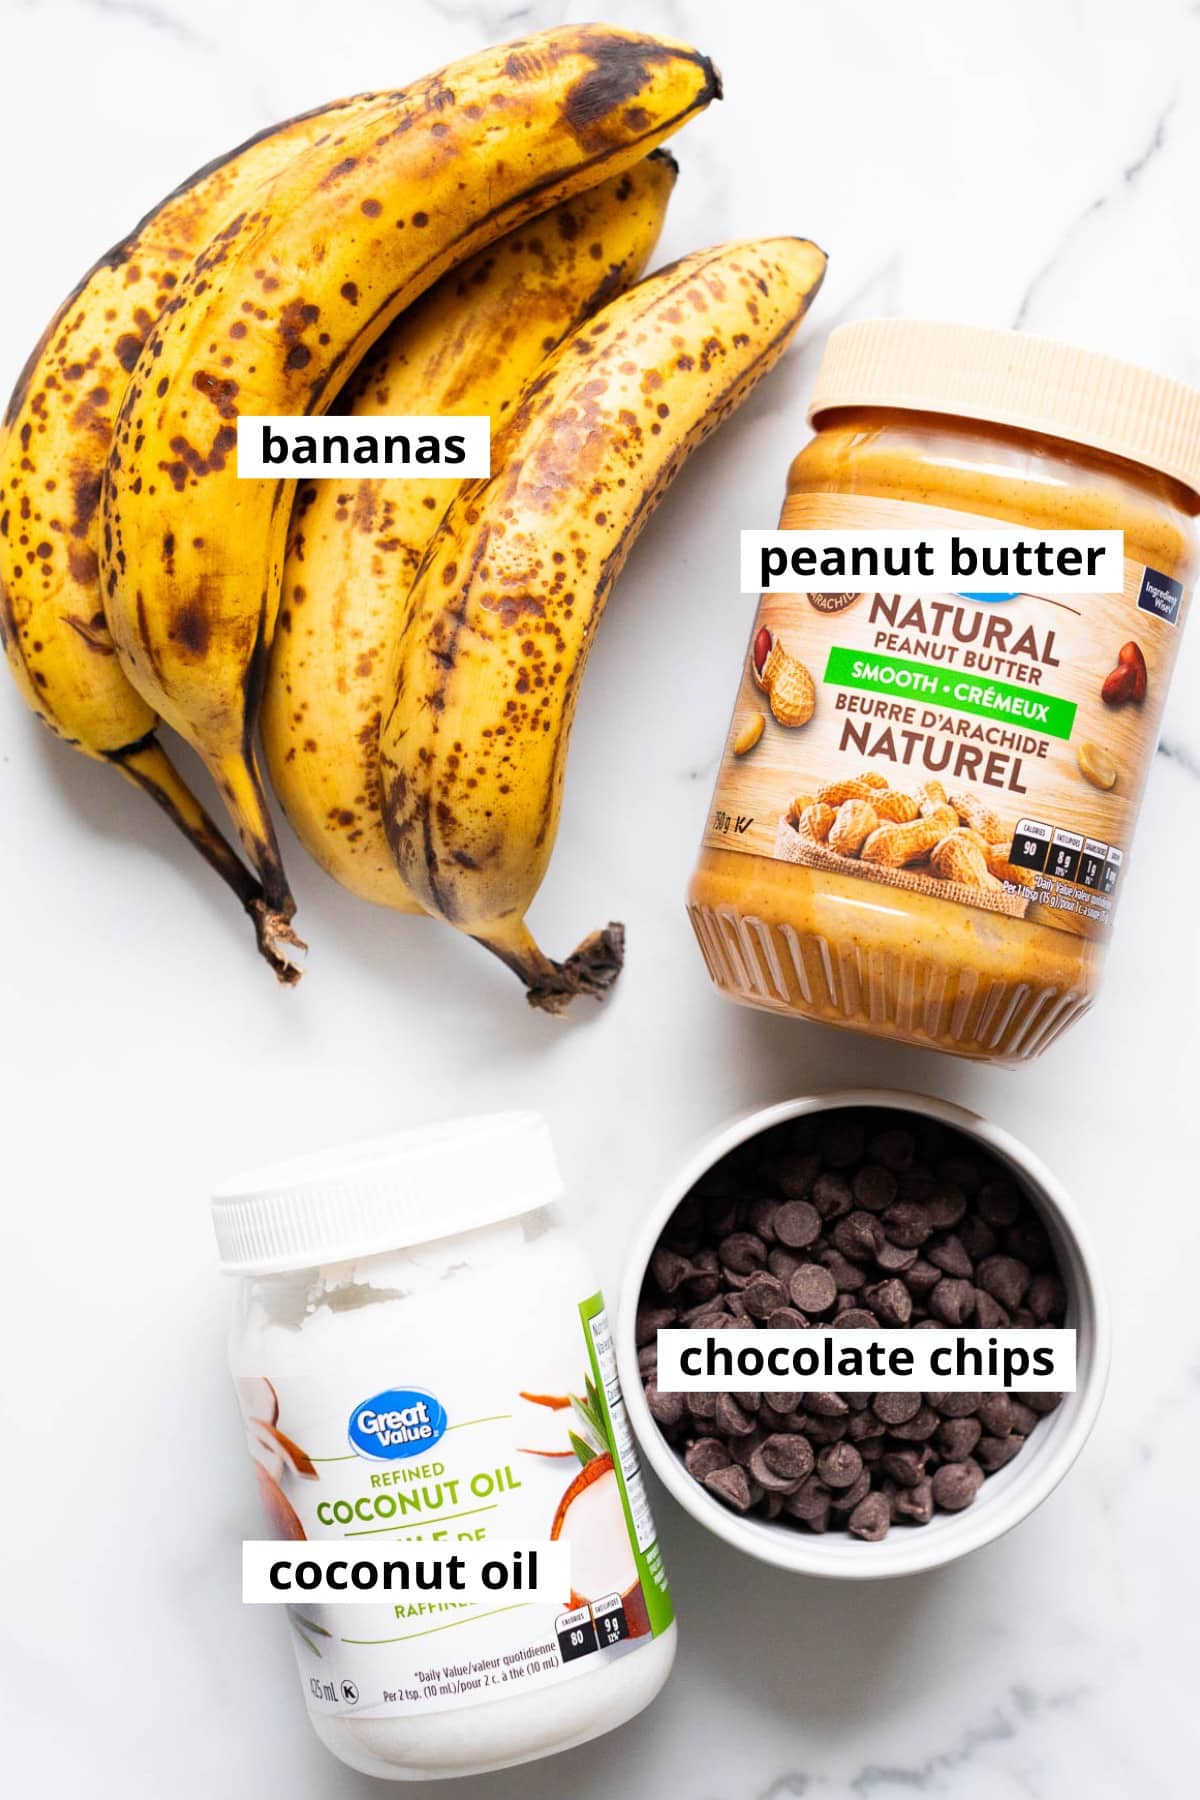 Bananas, peanut butter, chocolate chips, coconut oil.